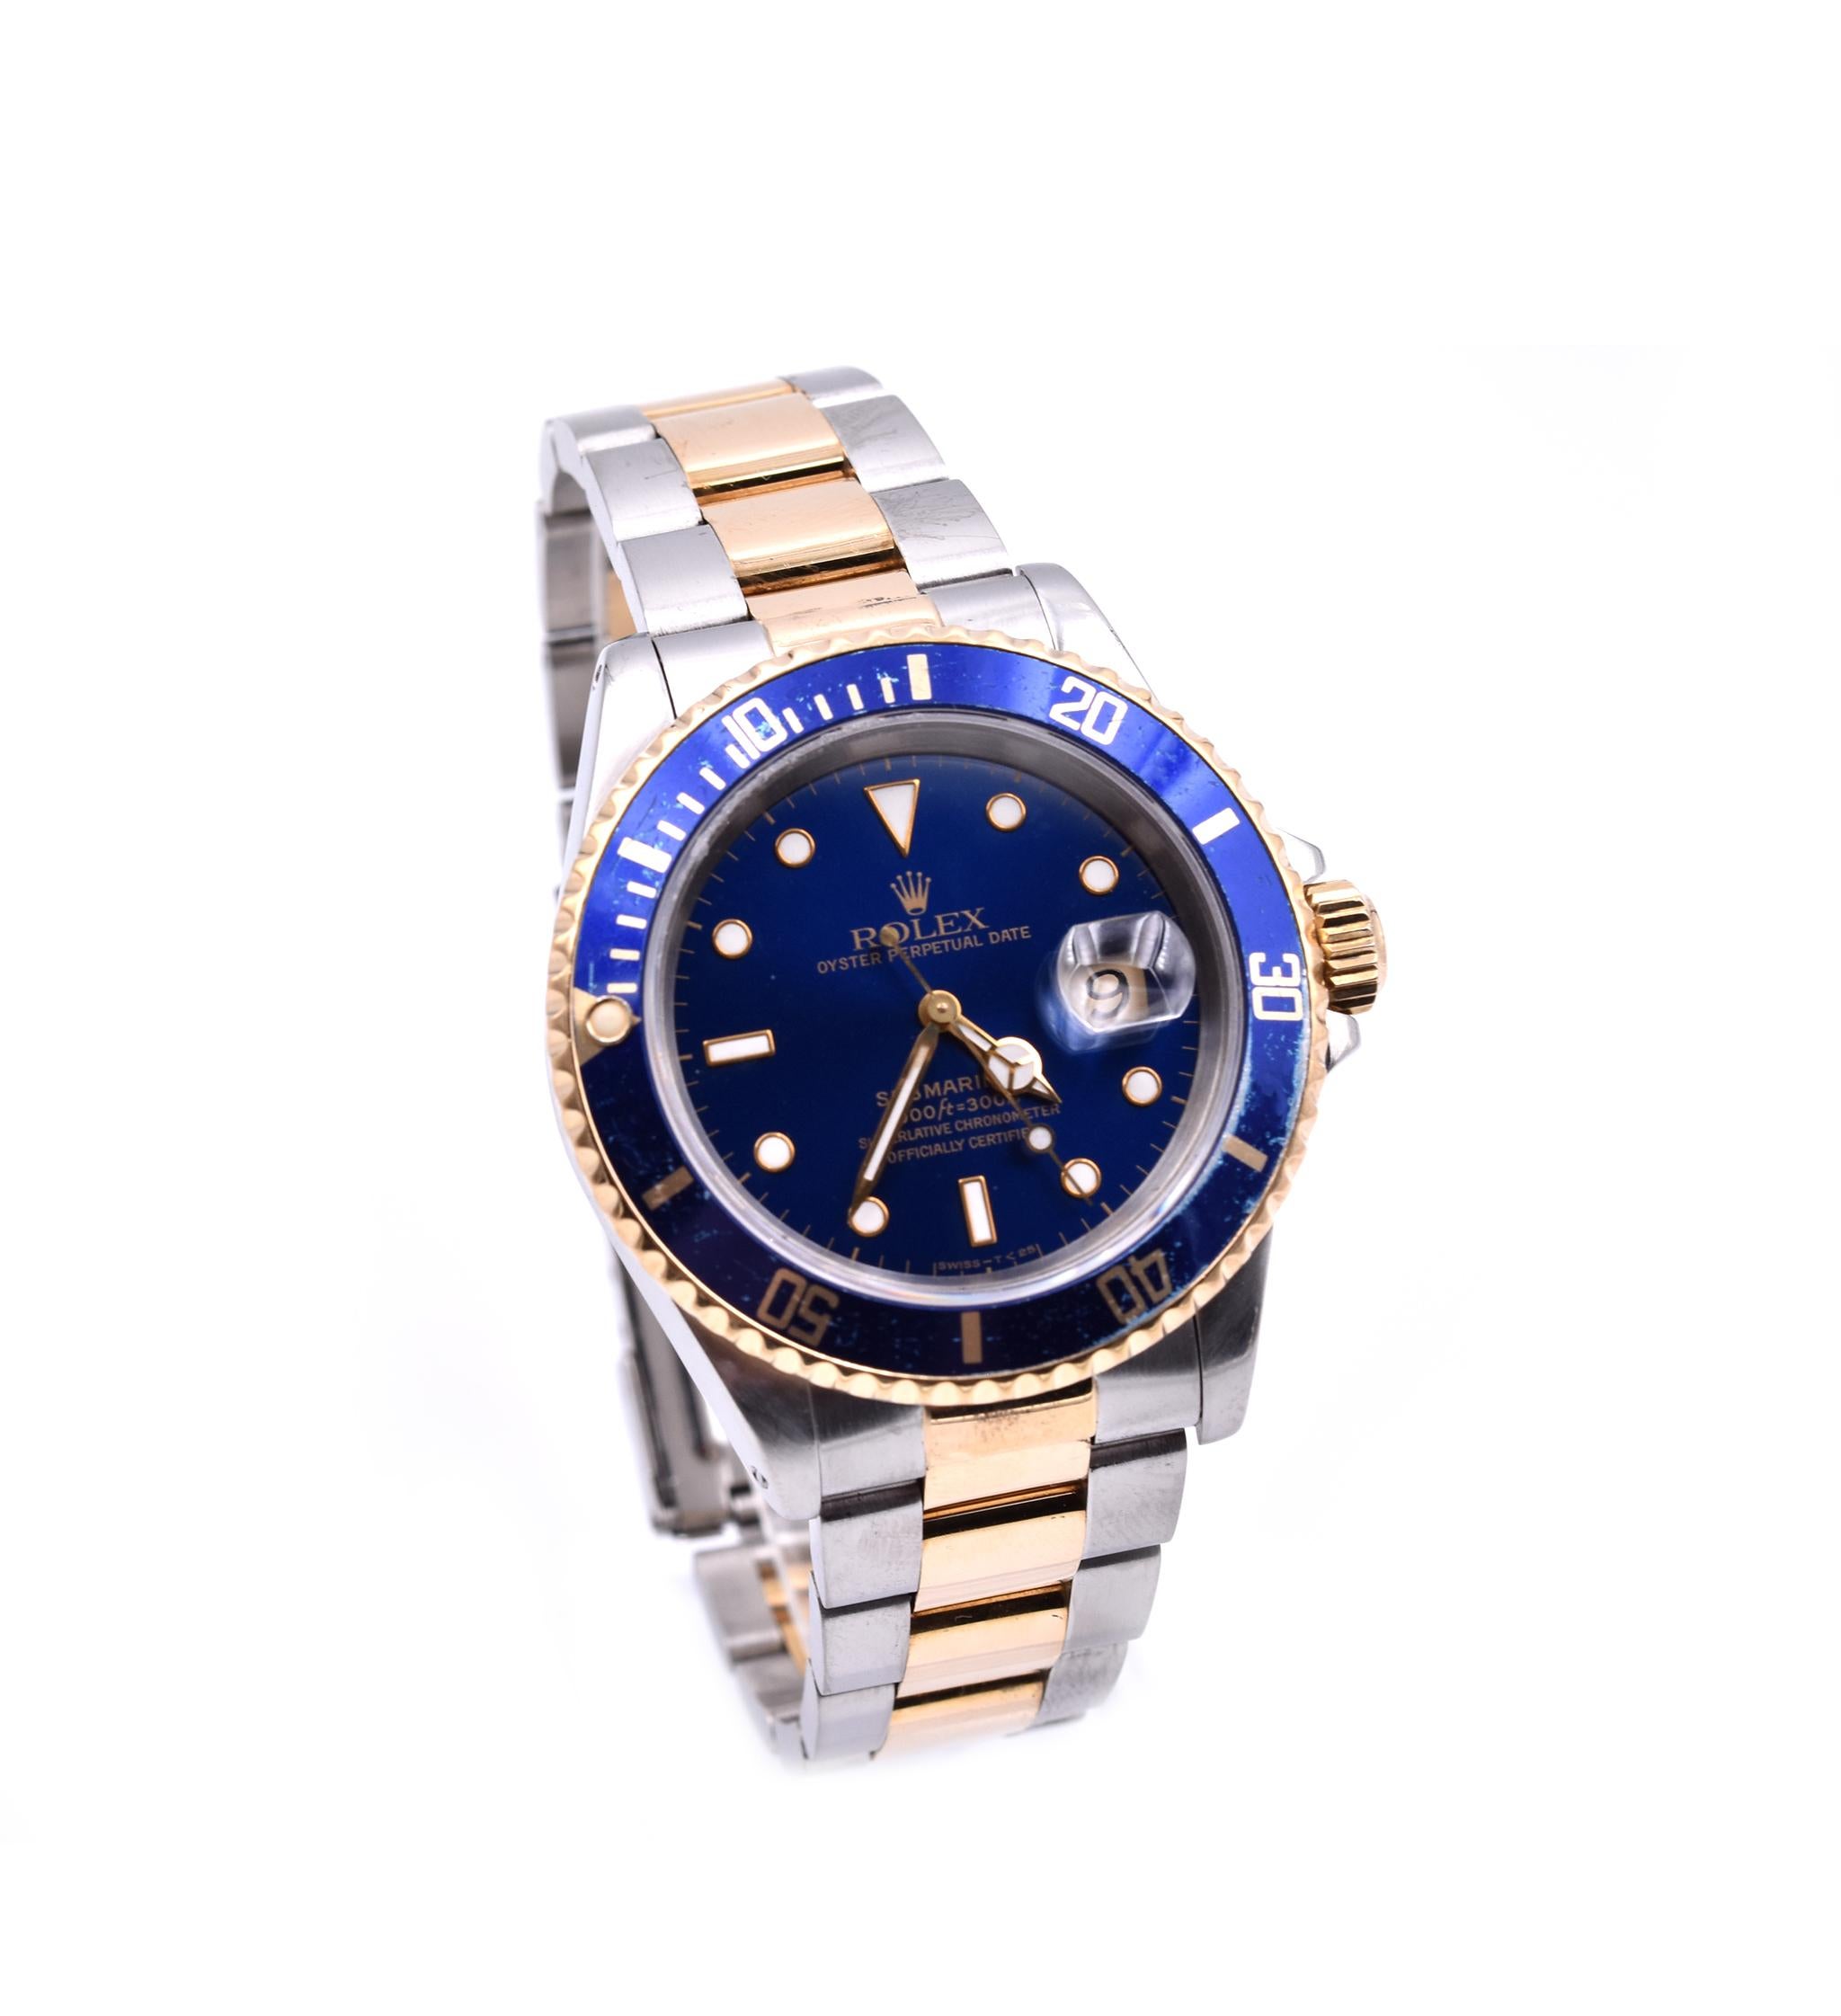 Movement: automatic
Function: hours, minutes, sweep seconds, date at 3 o’clock
Case: 40mm stainless steel case, 18k yellow gold blue bezel, scratch resistant sapphire crystal
Dial: blue dial, white hour markers
Band: 18k yellow gold and stainless